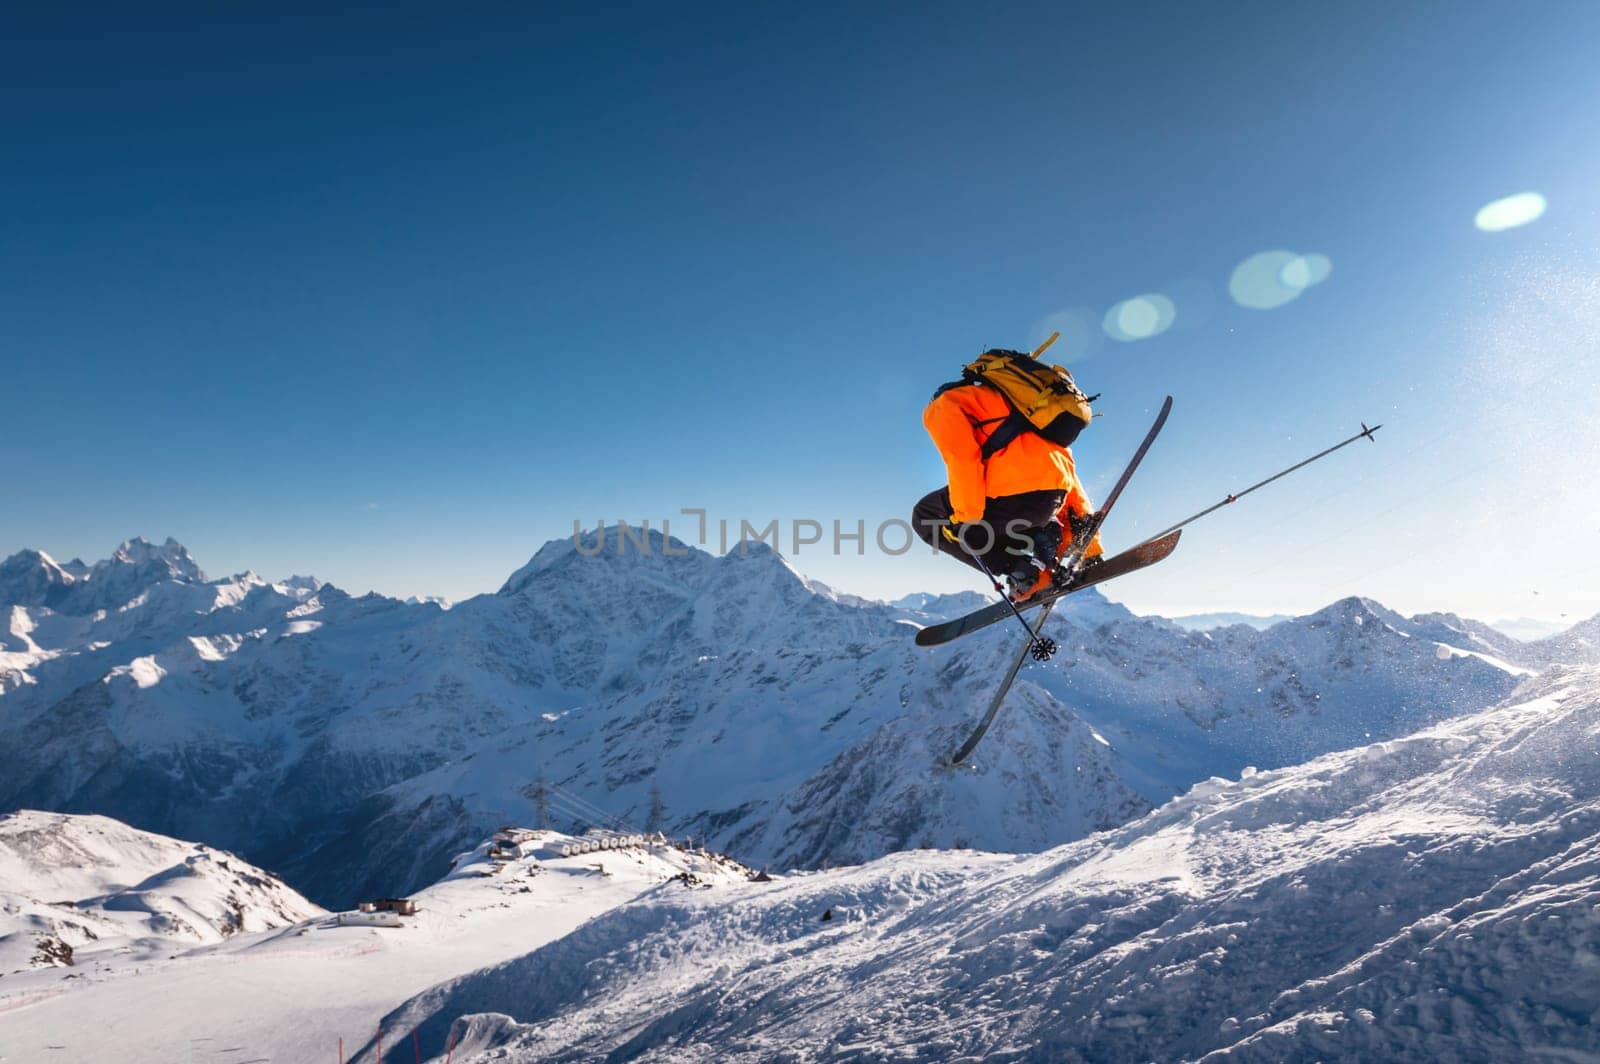 The skier jumps on the background of the blue sky and snow-capped mountains. freestyle skier performs helicopter with crossed skis simultaneously with full rotation by yanik88